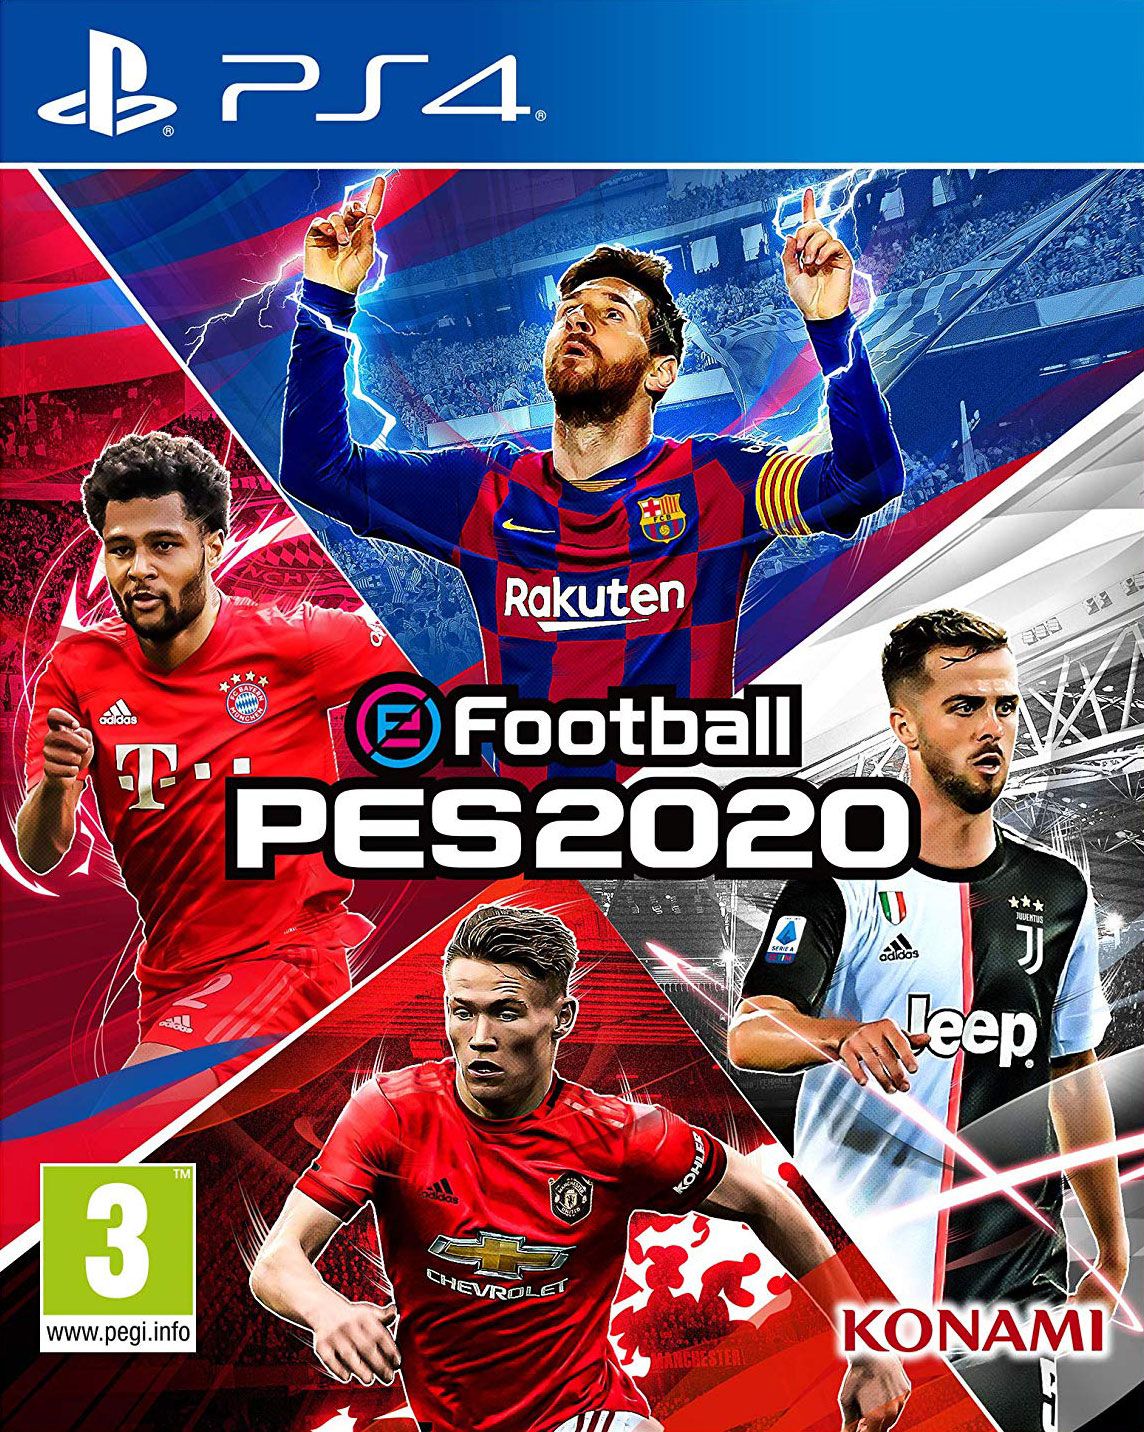 release date of pes 2020 mobile